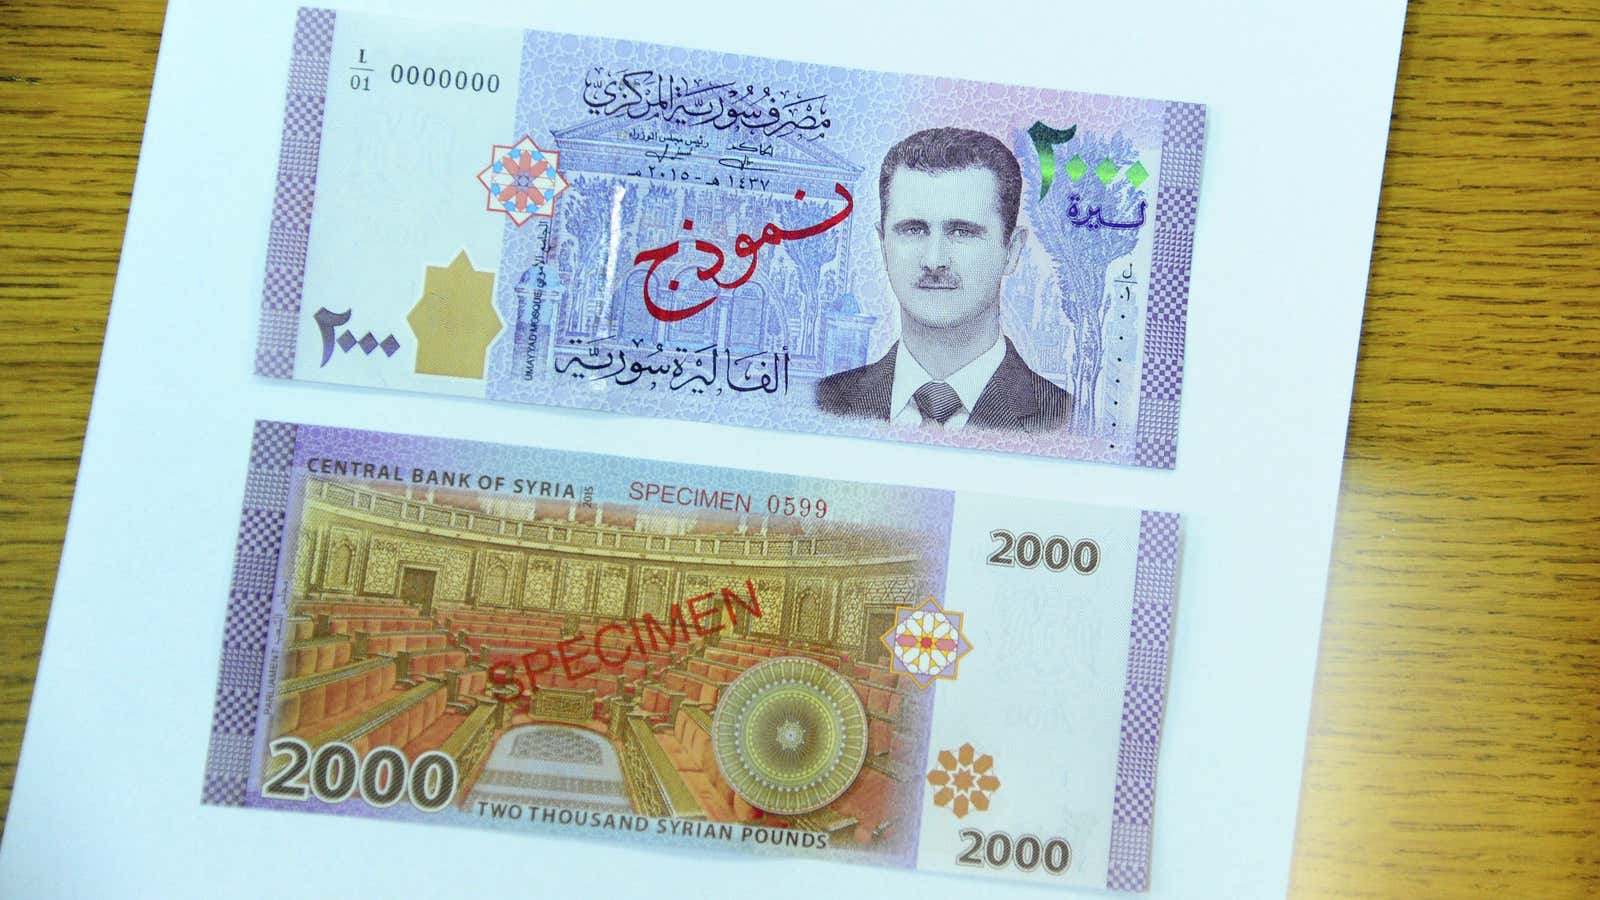 For the first time since taking office, Assad’s face adorns Syria’s currency.